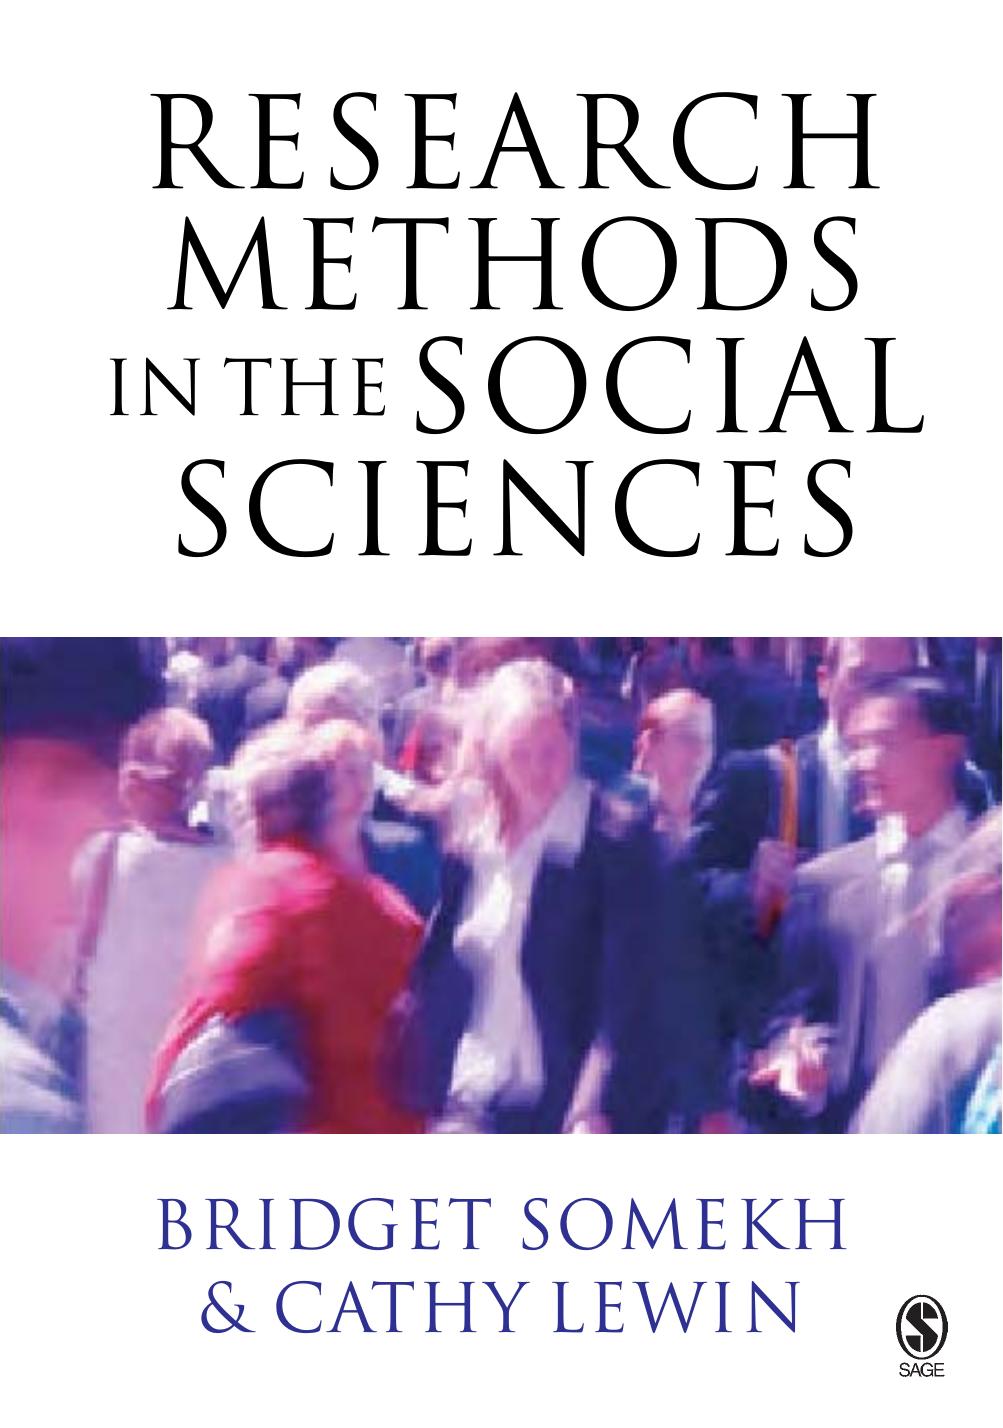 Research Methods in the Social Sciences ( PDFDrive )